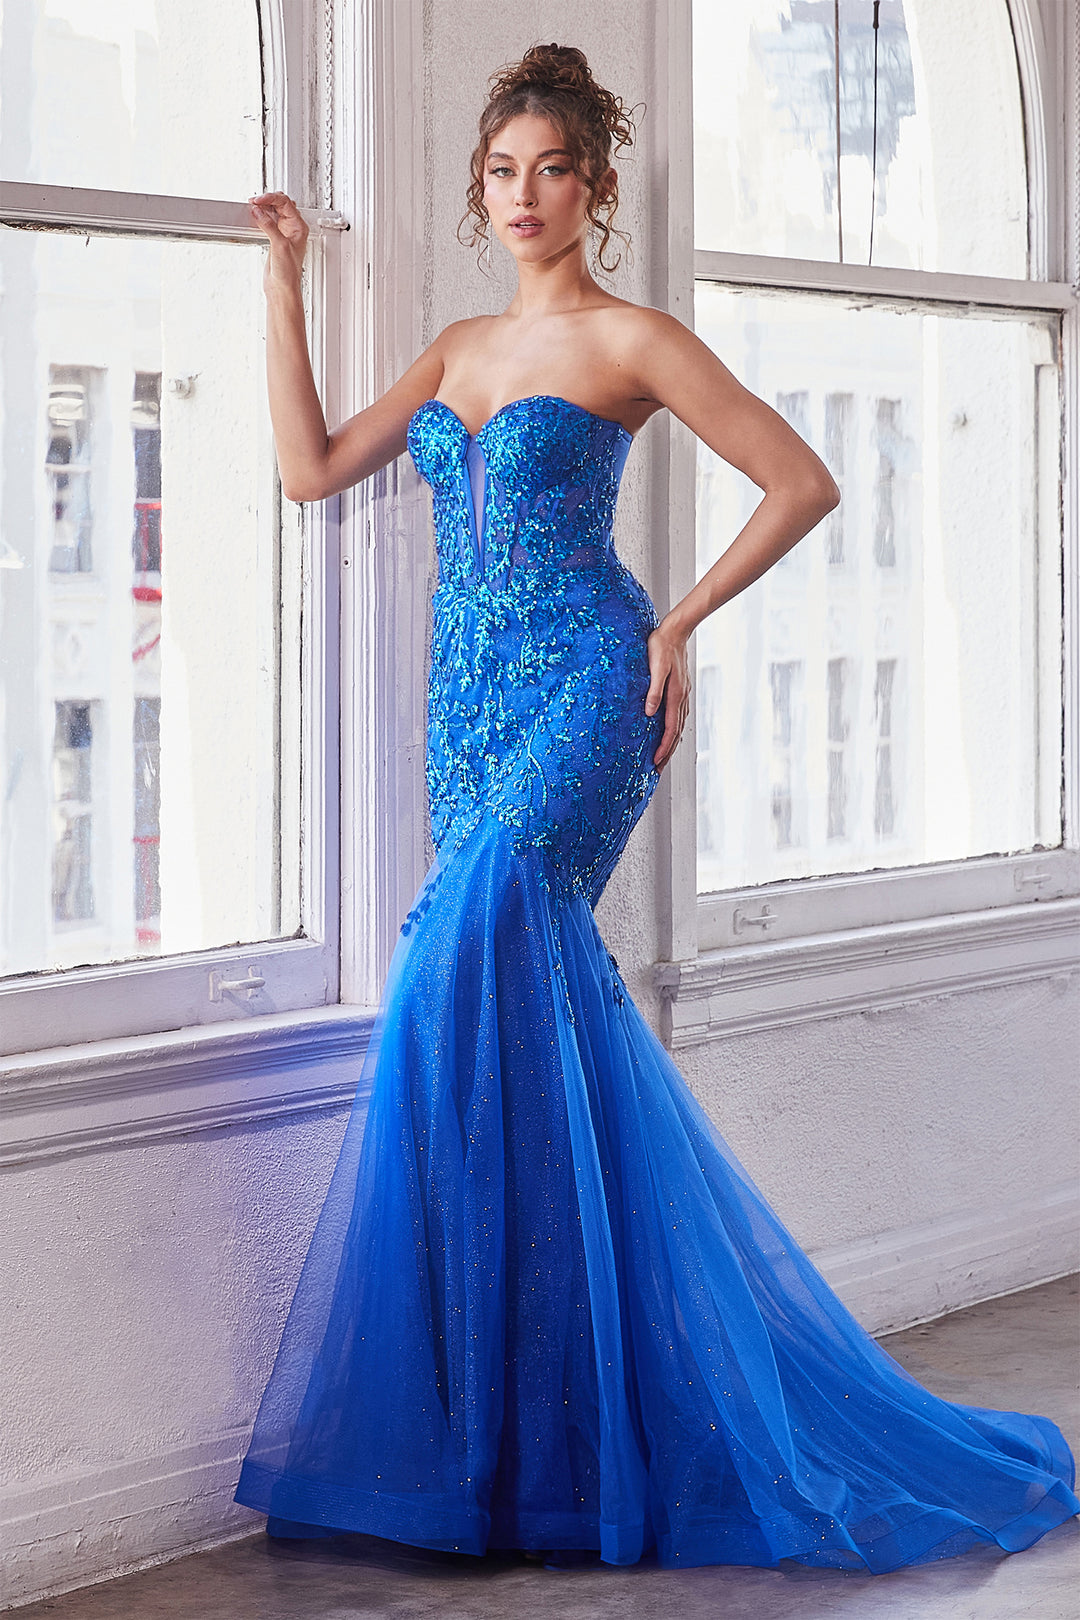 Sequin Tulle Strapless Mermaid Dress by Ladivine CB139